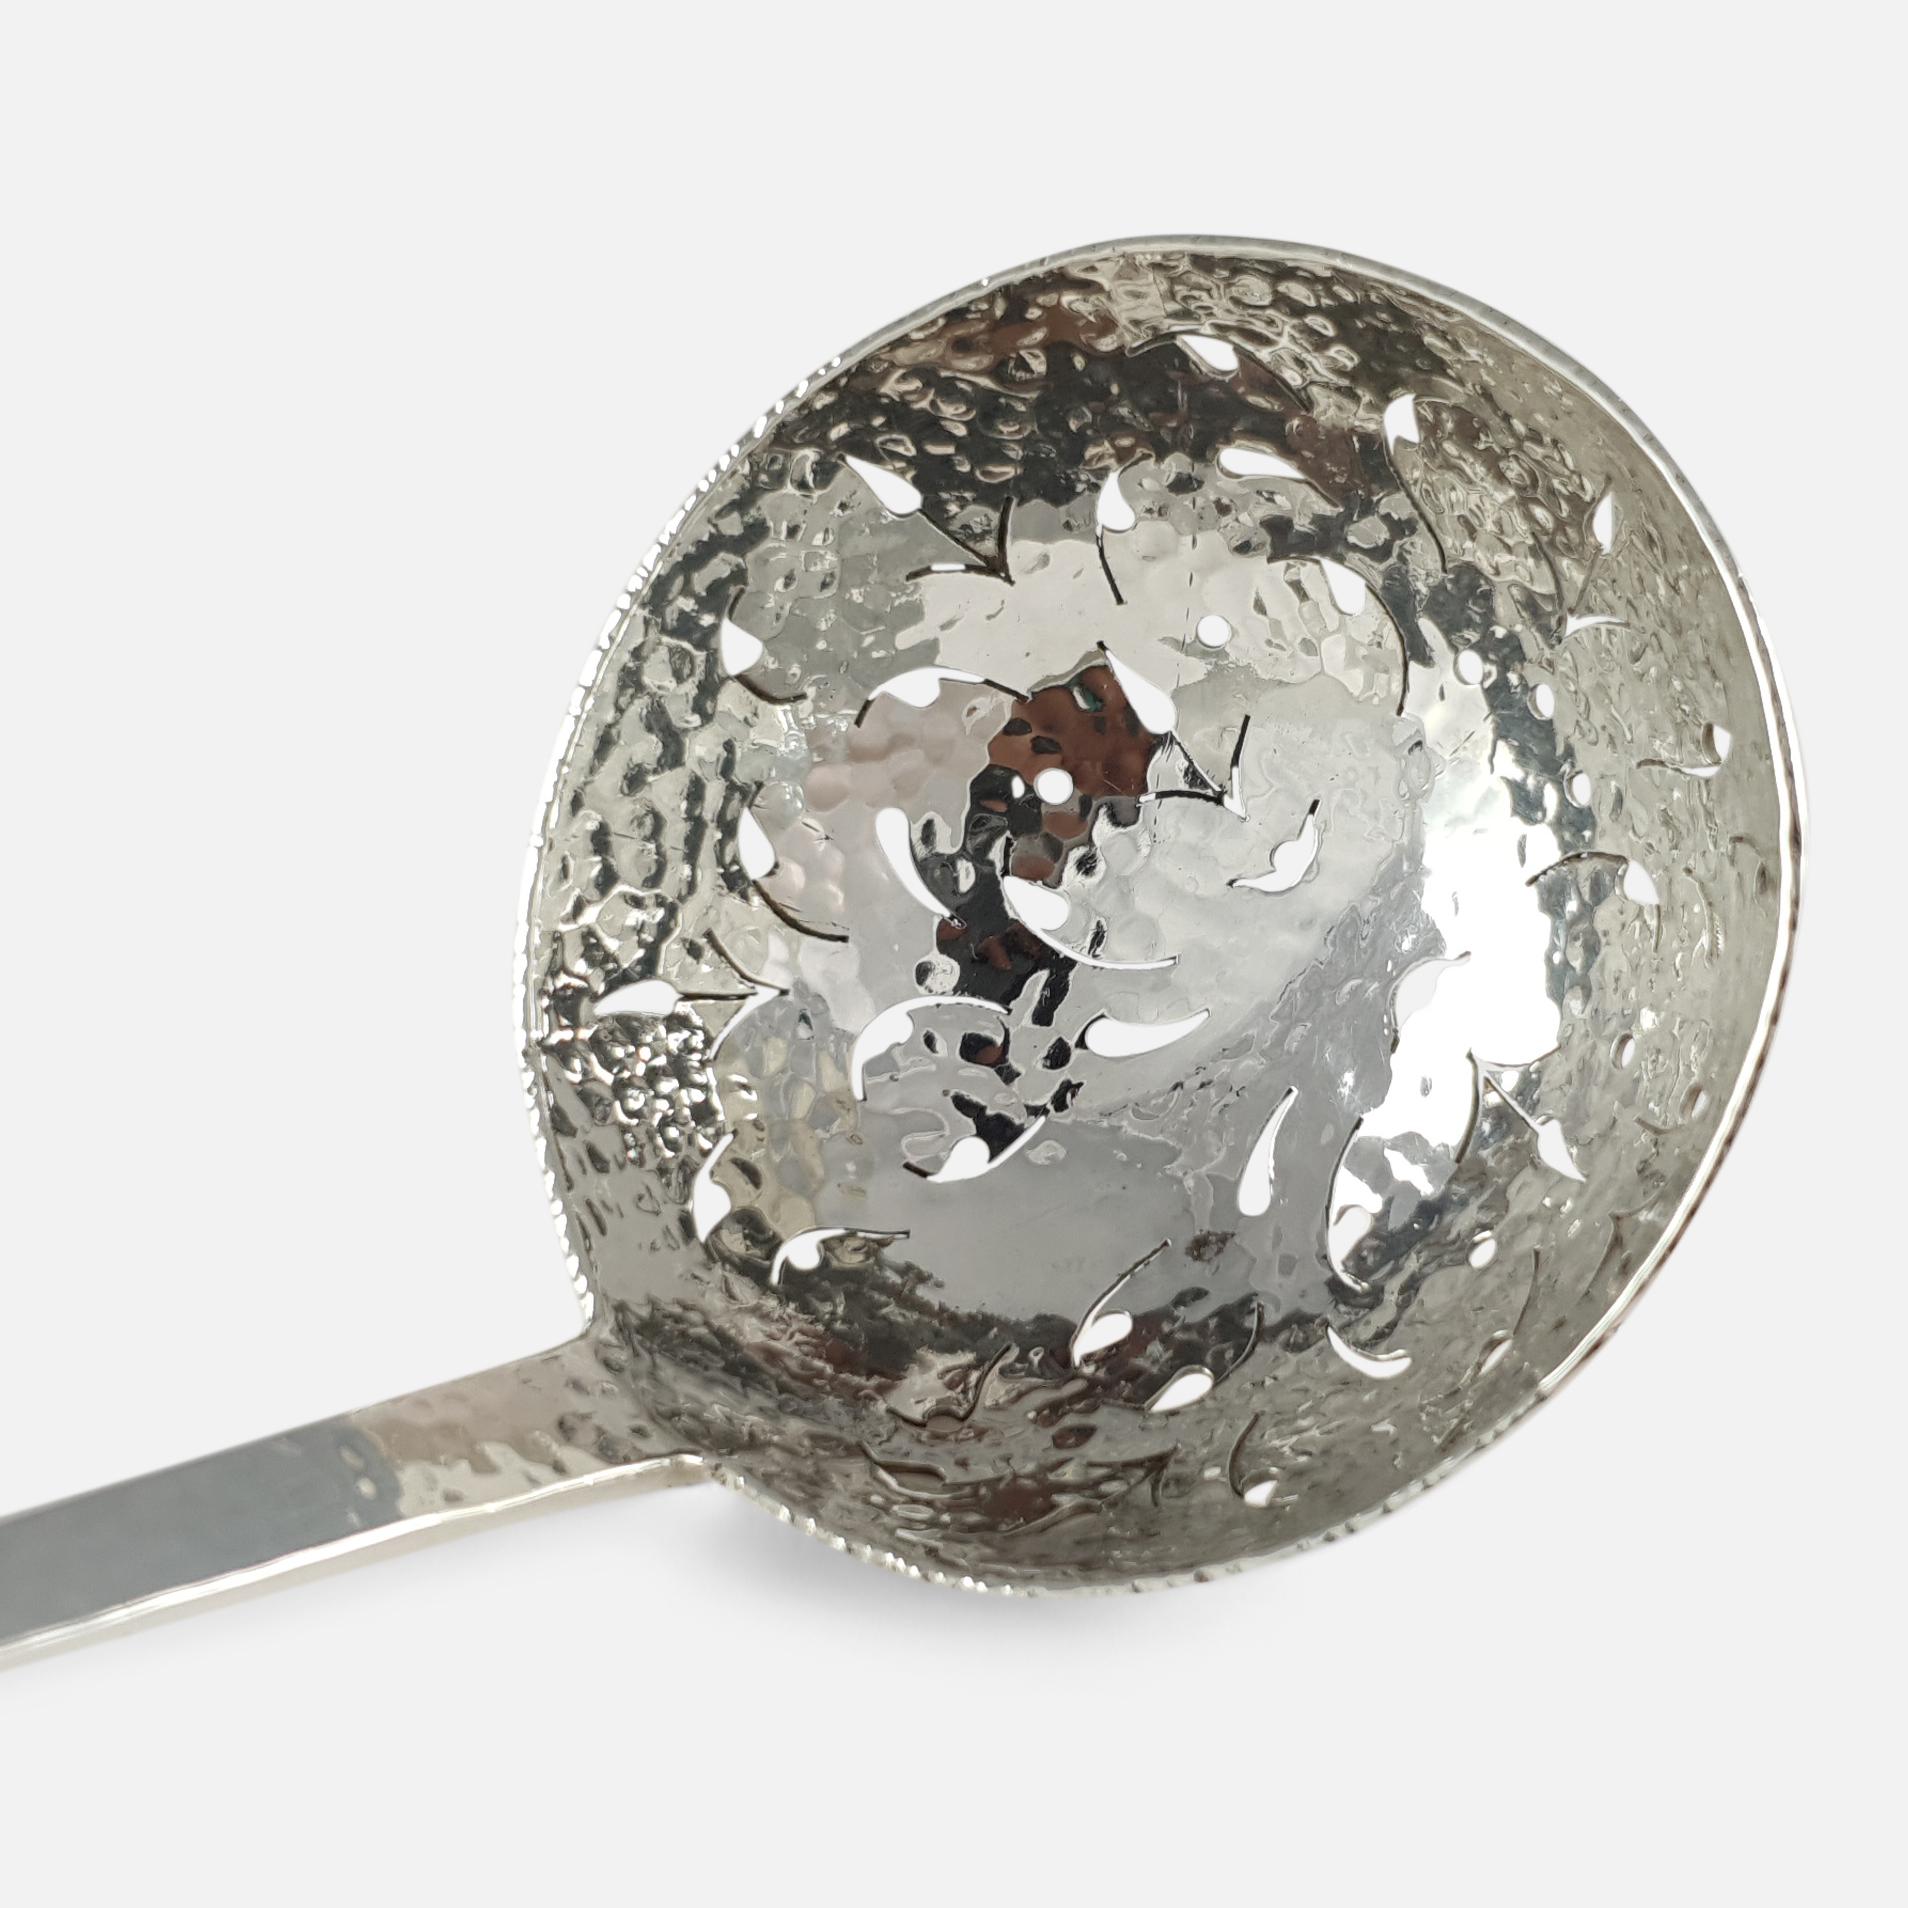 An Edwardian sterling silver spot hammered pierced sugar sifting spoon.

Date: 1903.

Period: Early 20th century.

Engraving: Unengraved.

Maker: Wakely & Wheeler.

Measurement: The sifter measures 16.2cm and the bowl is 5.0cm in diameter.

Weight: